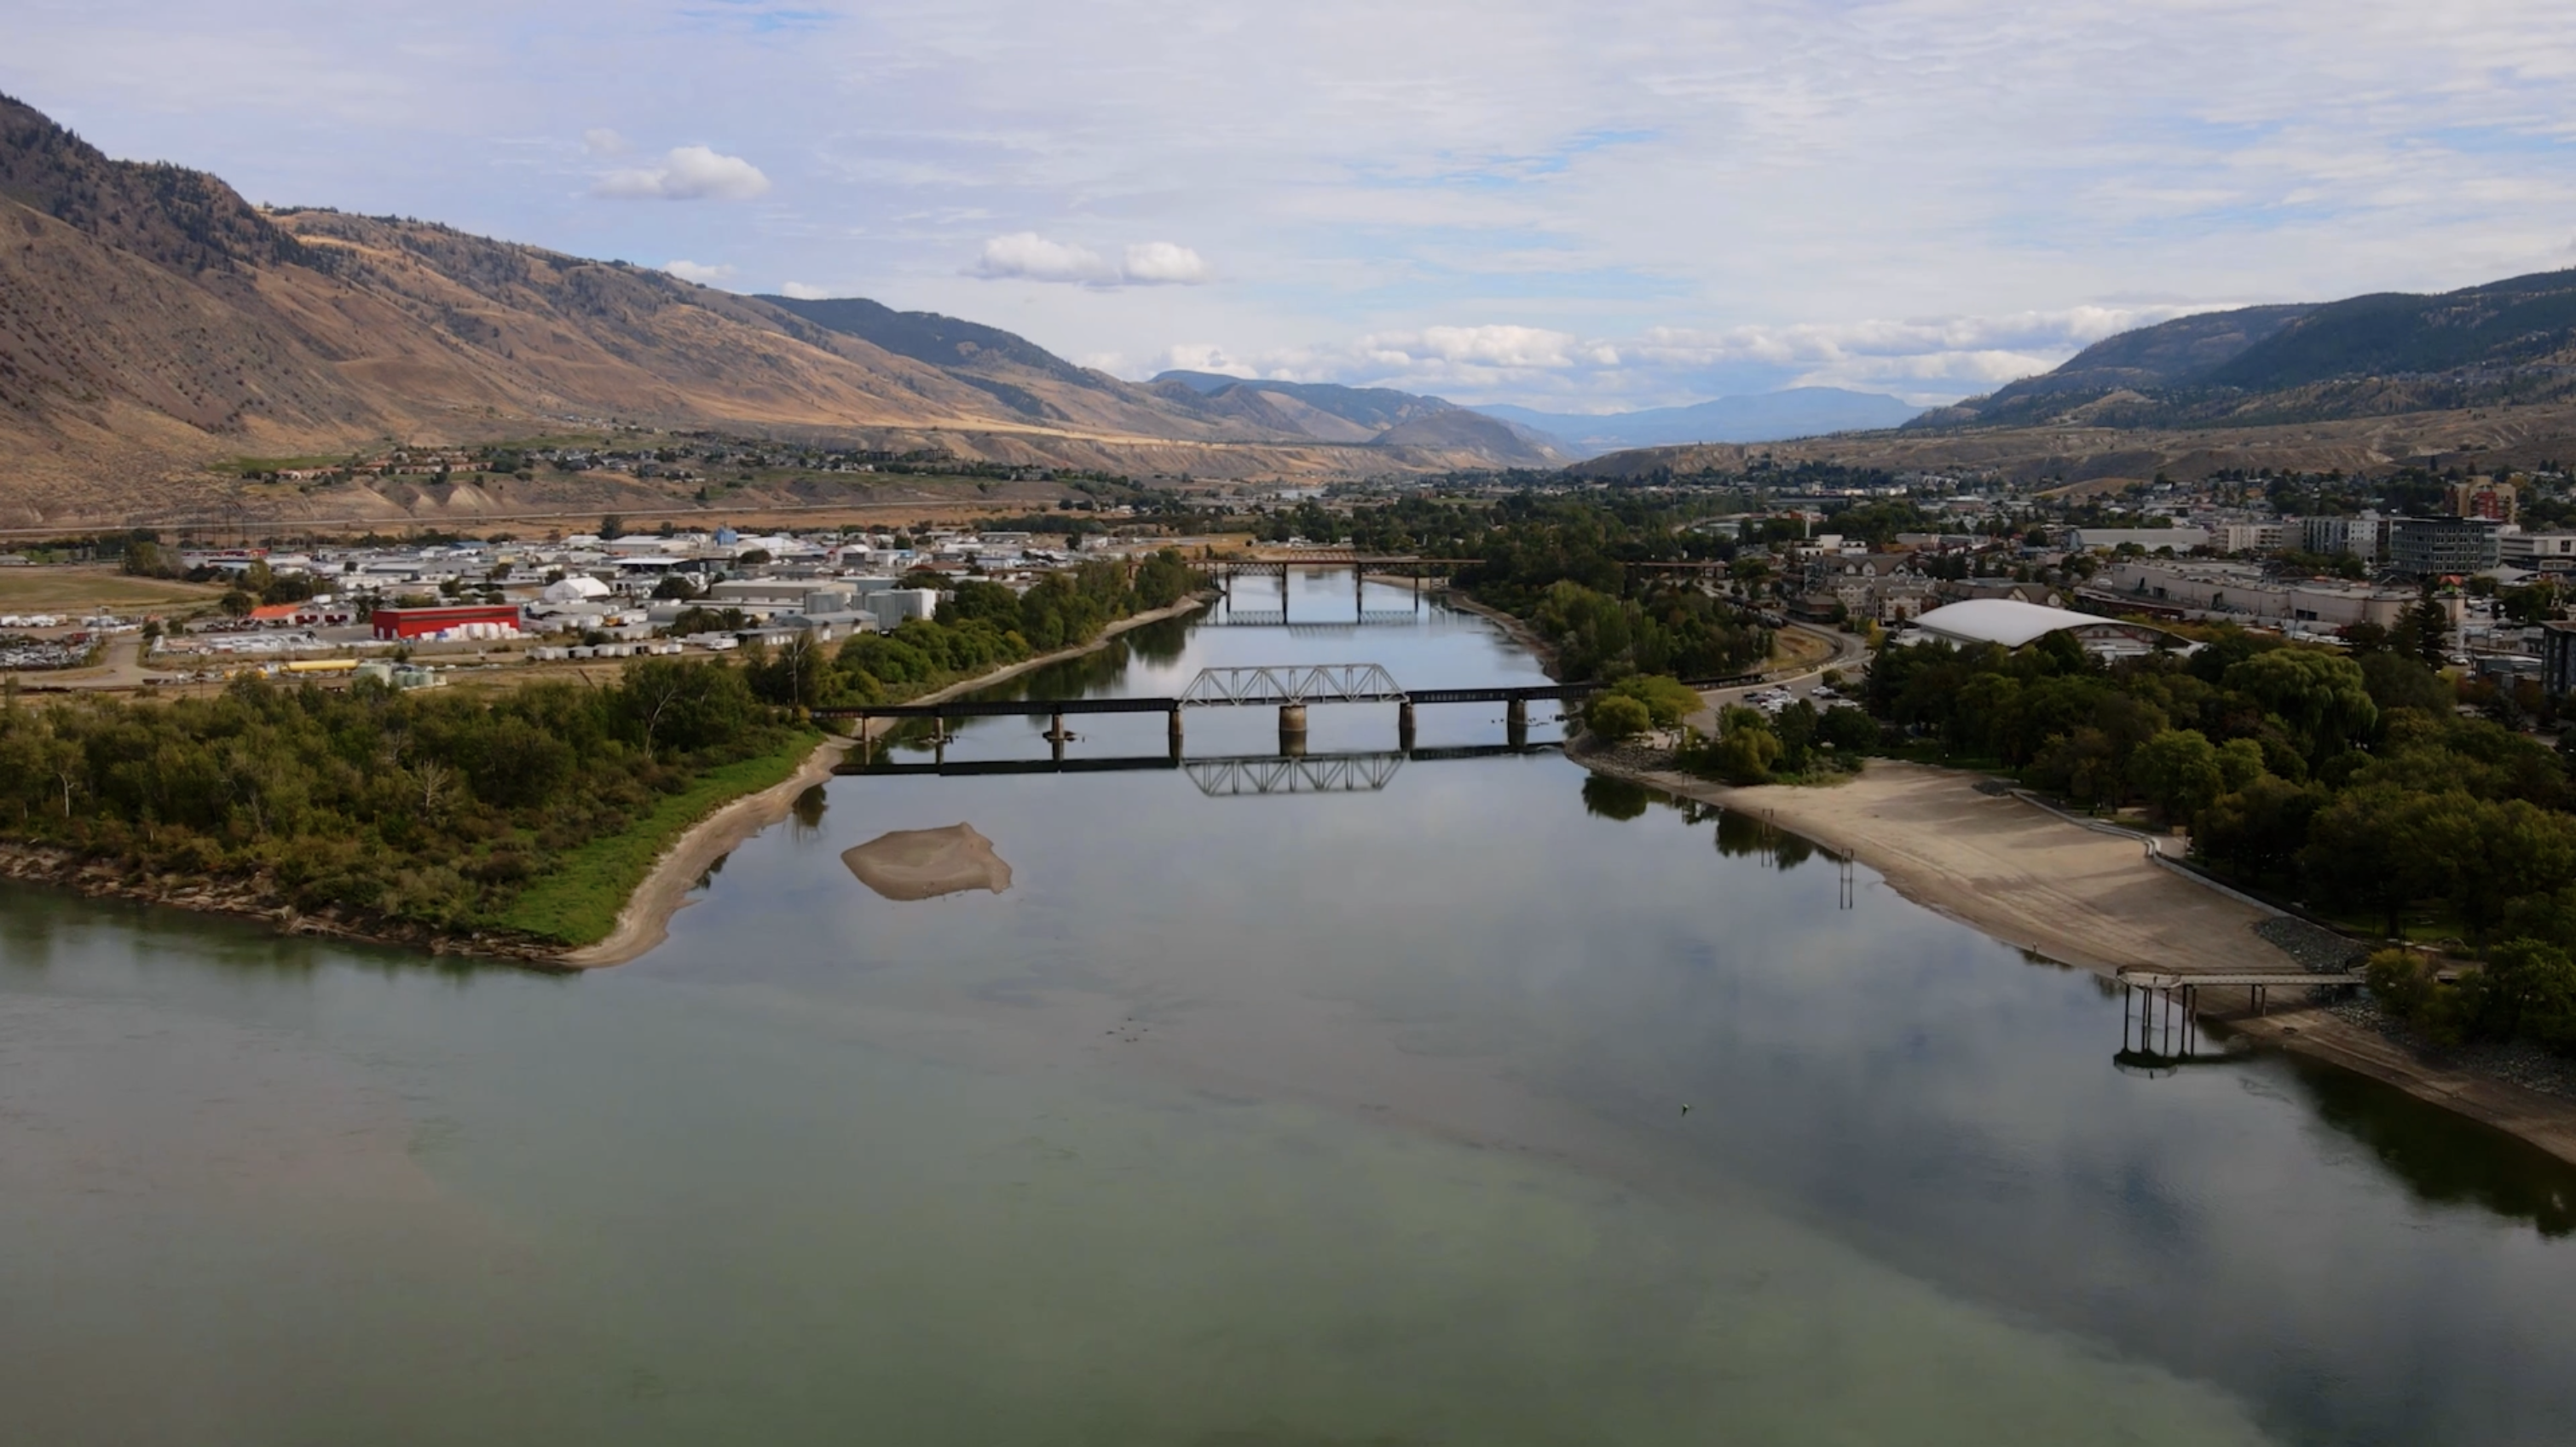 Kamloops, BC from the air – a bridge crosses a river with hills on either side.